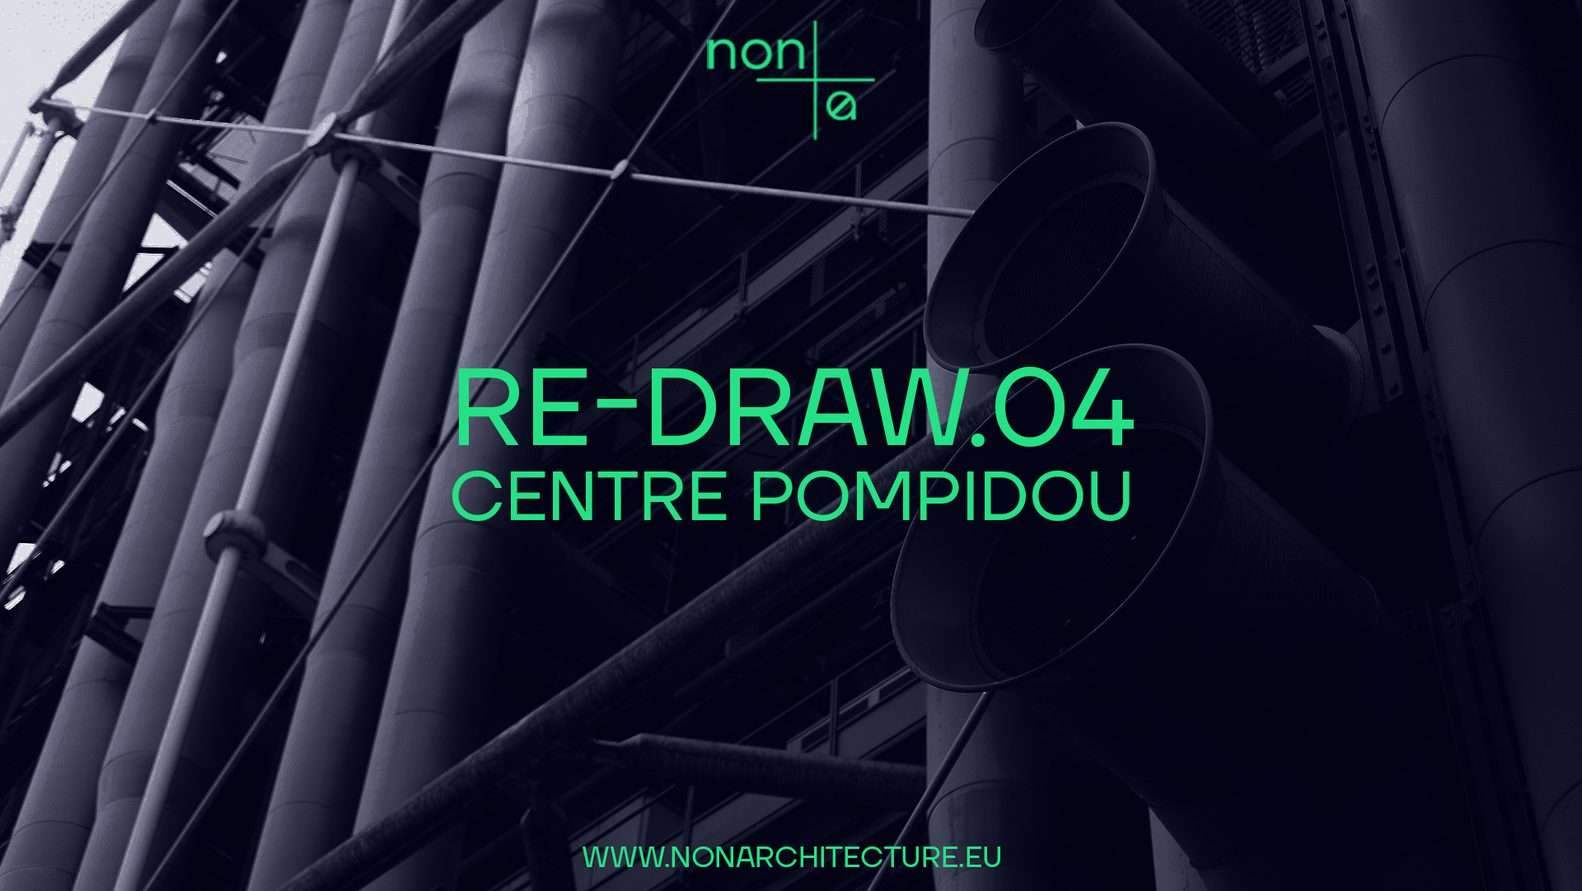 Re-draw.04: Pompidou / Competition!